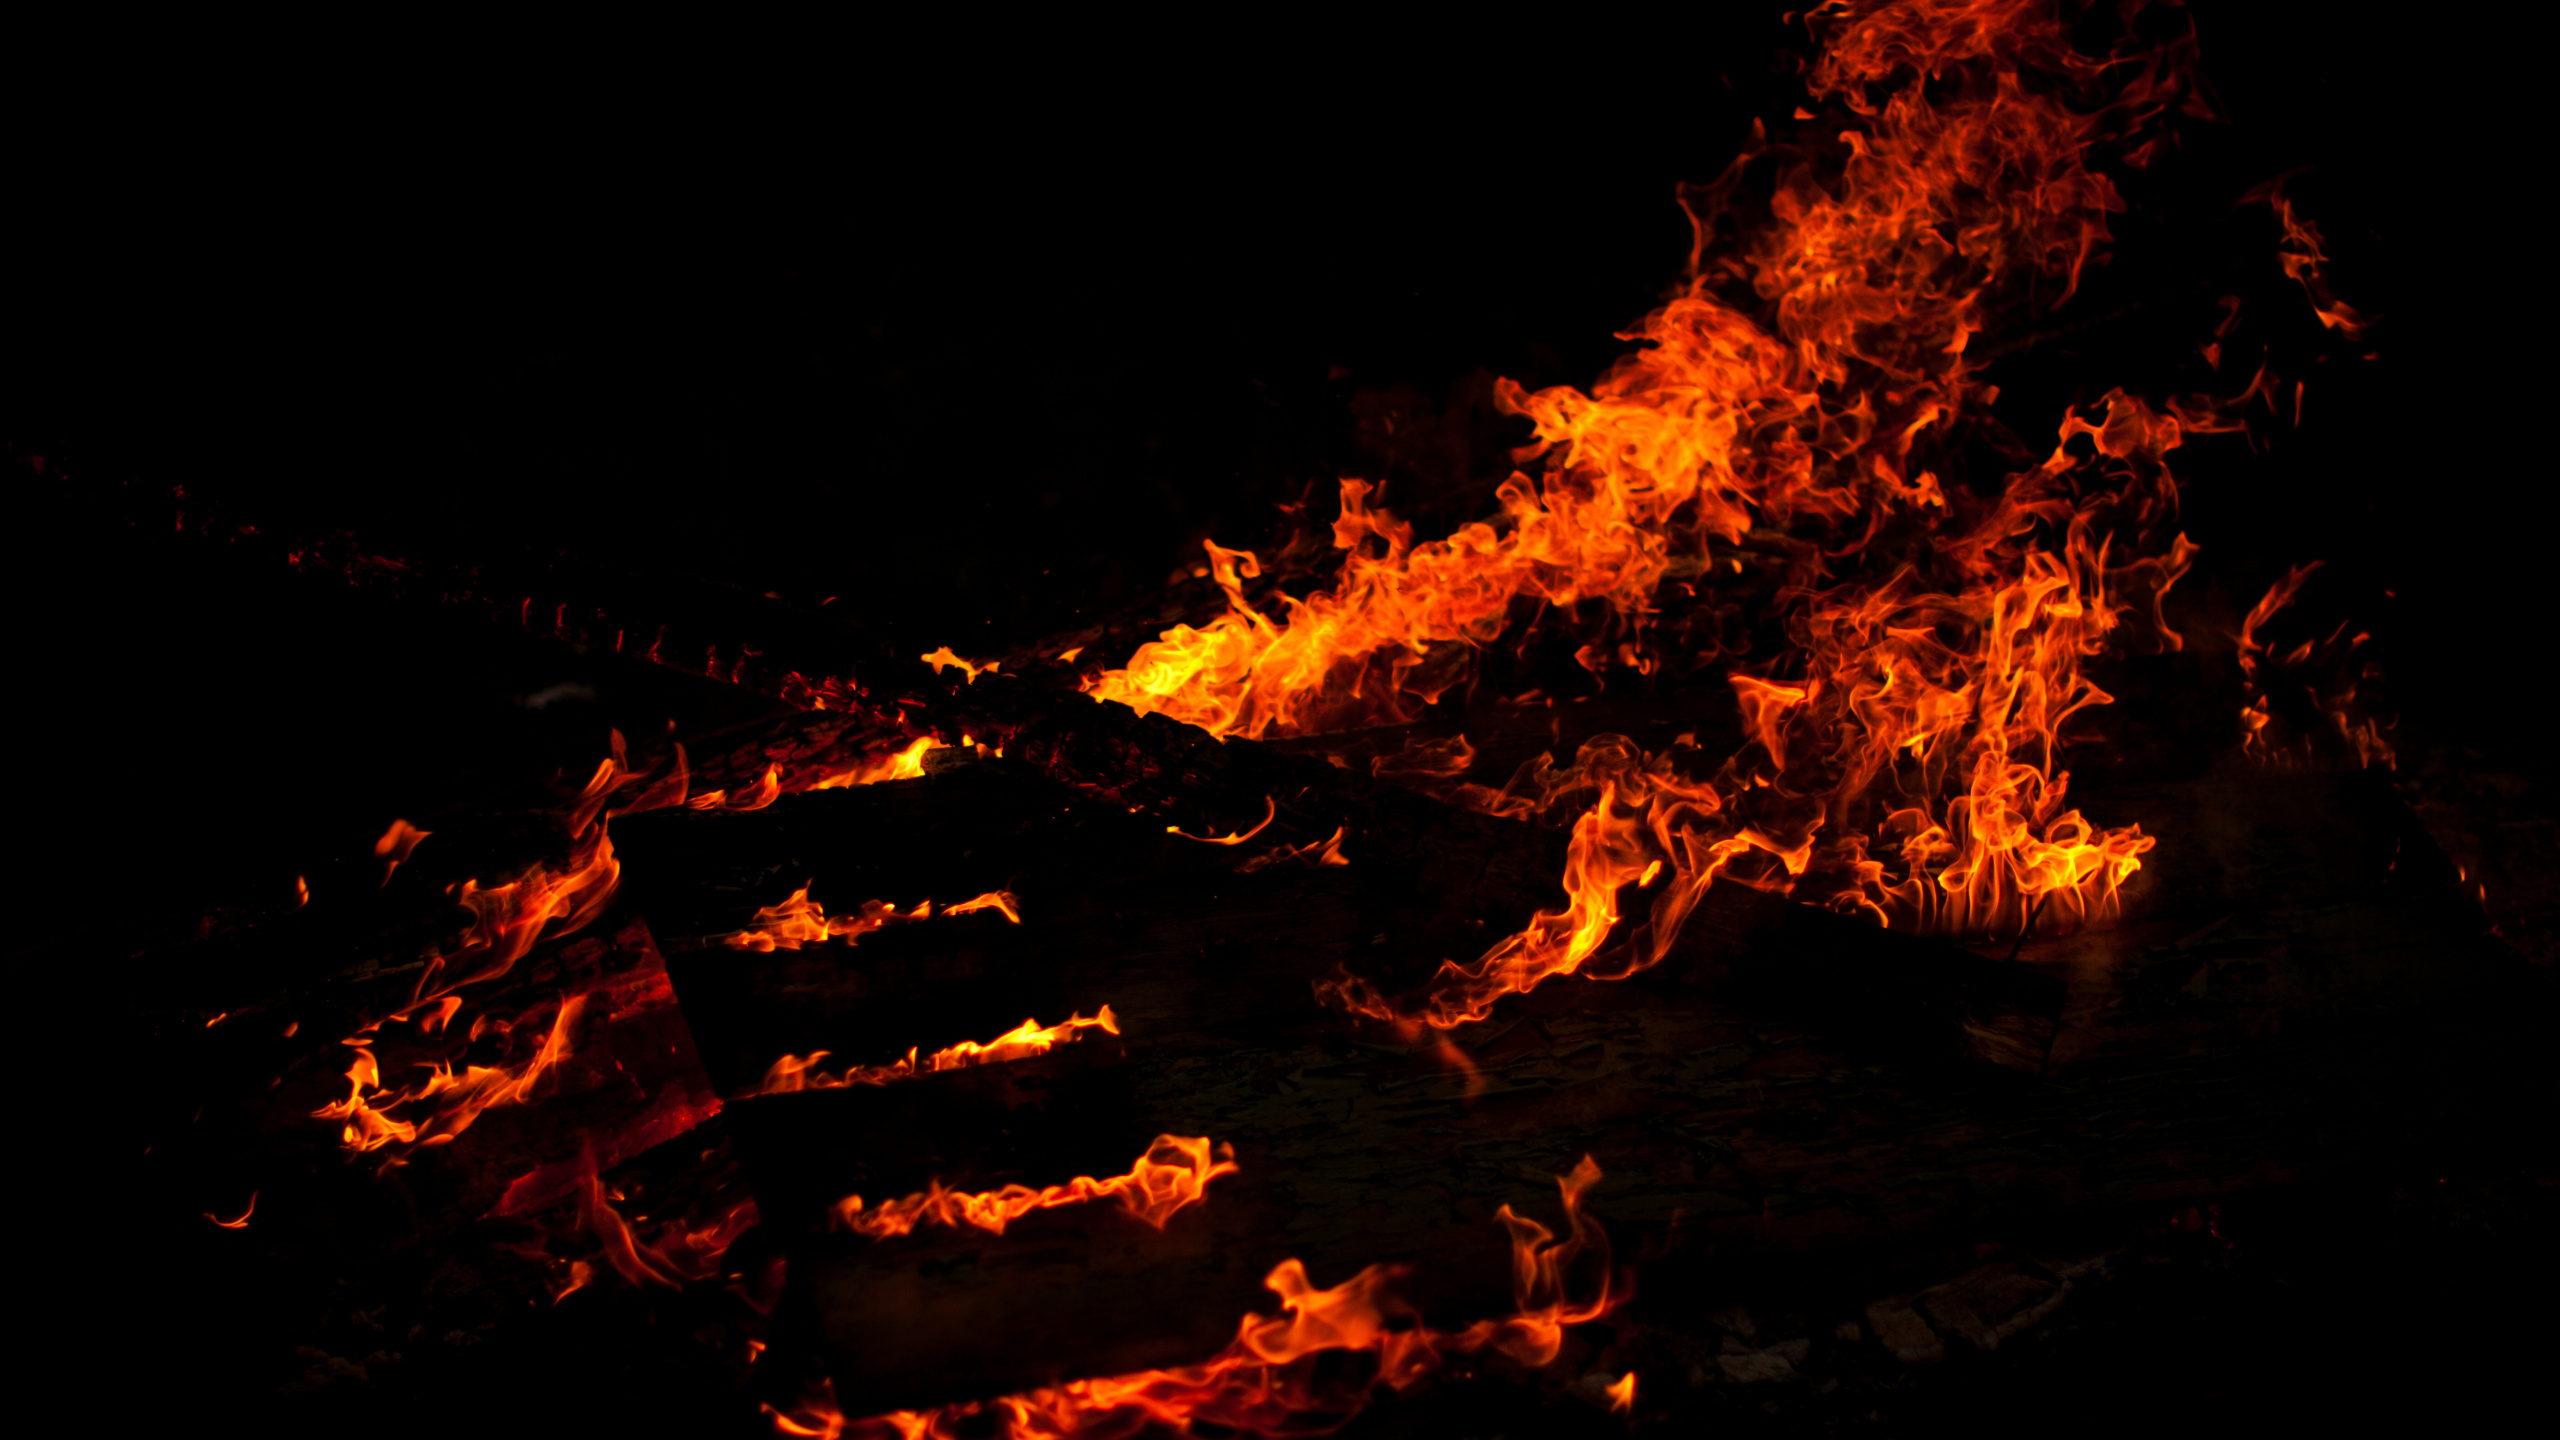 Fire on Fire During Night Time. Wallpaper in 2560x1440 Resolution